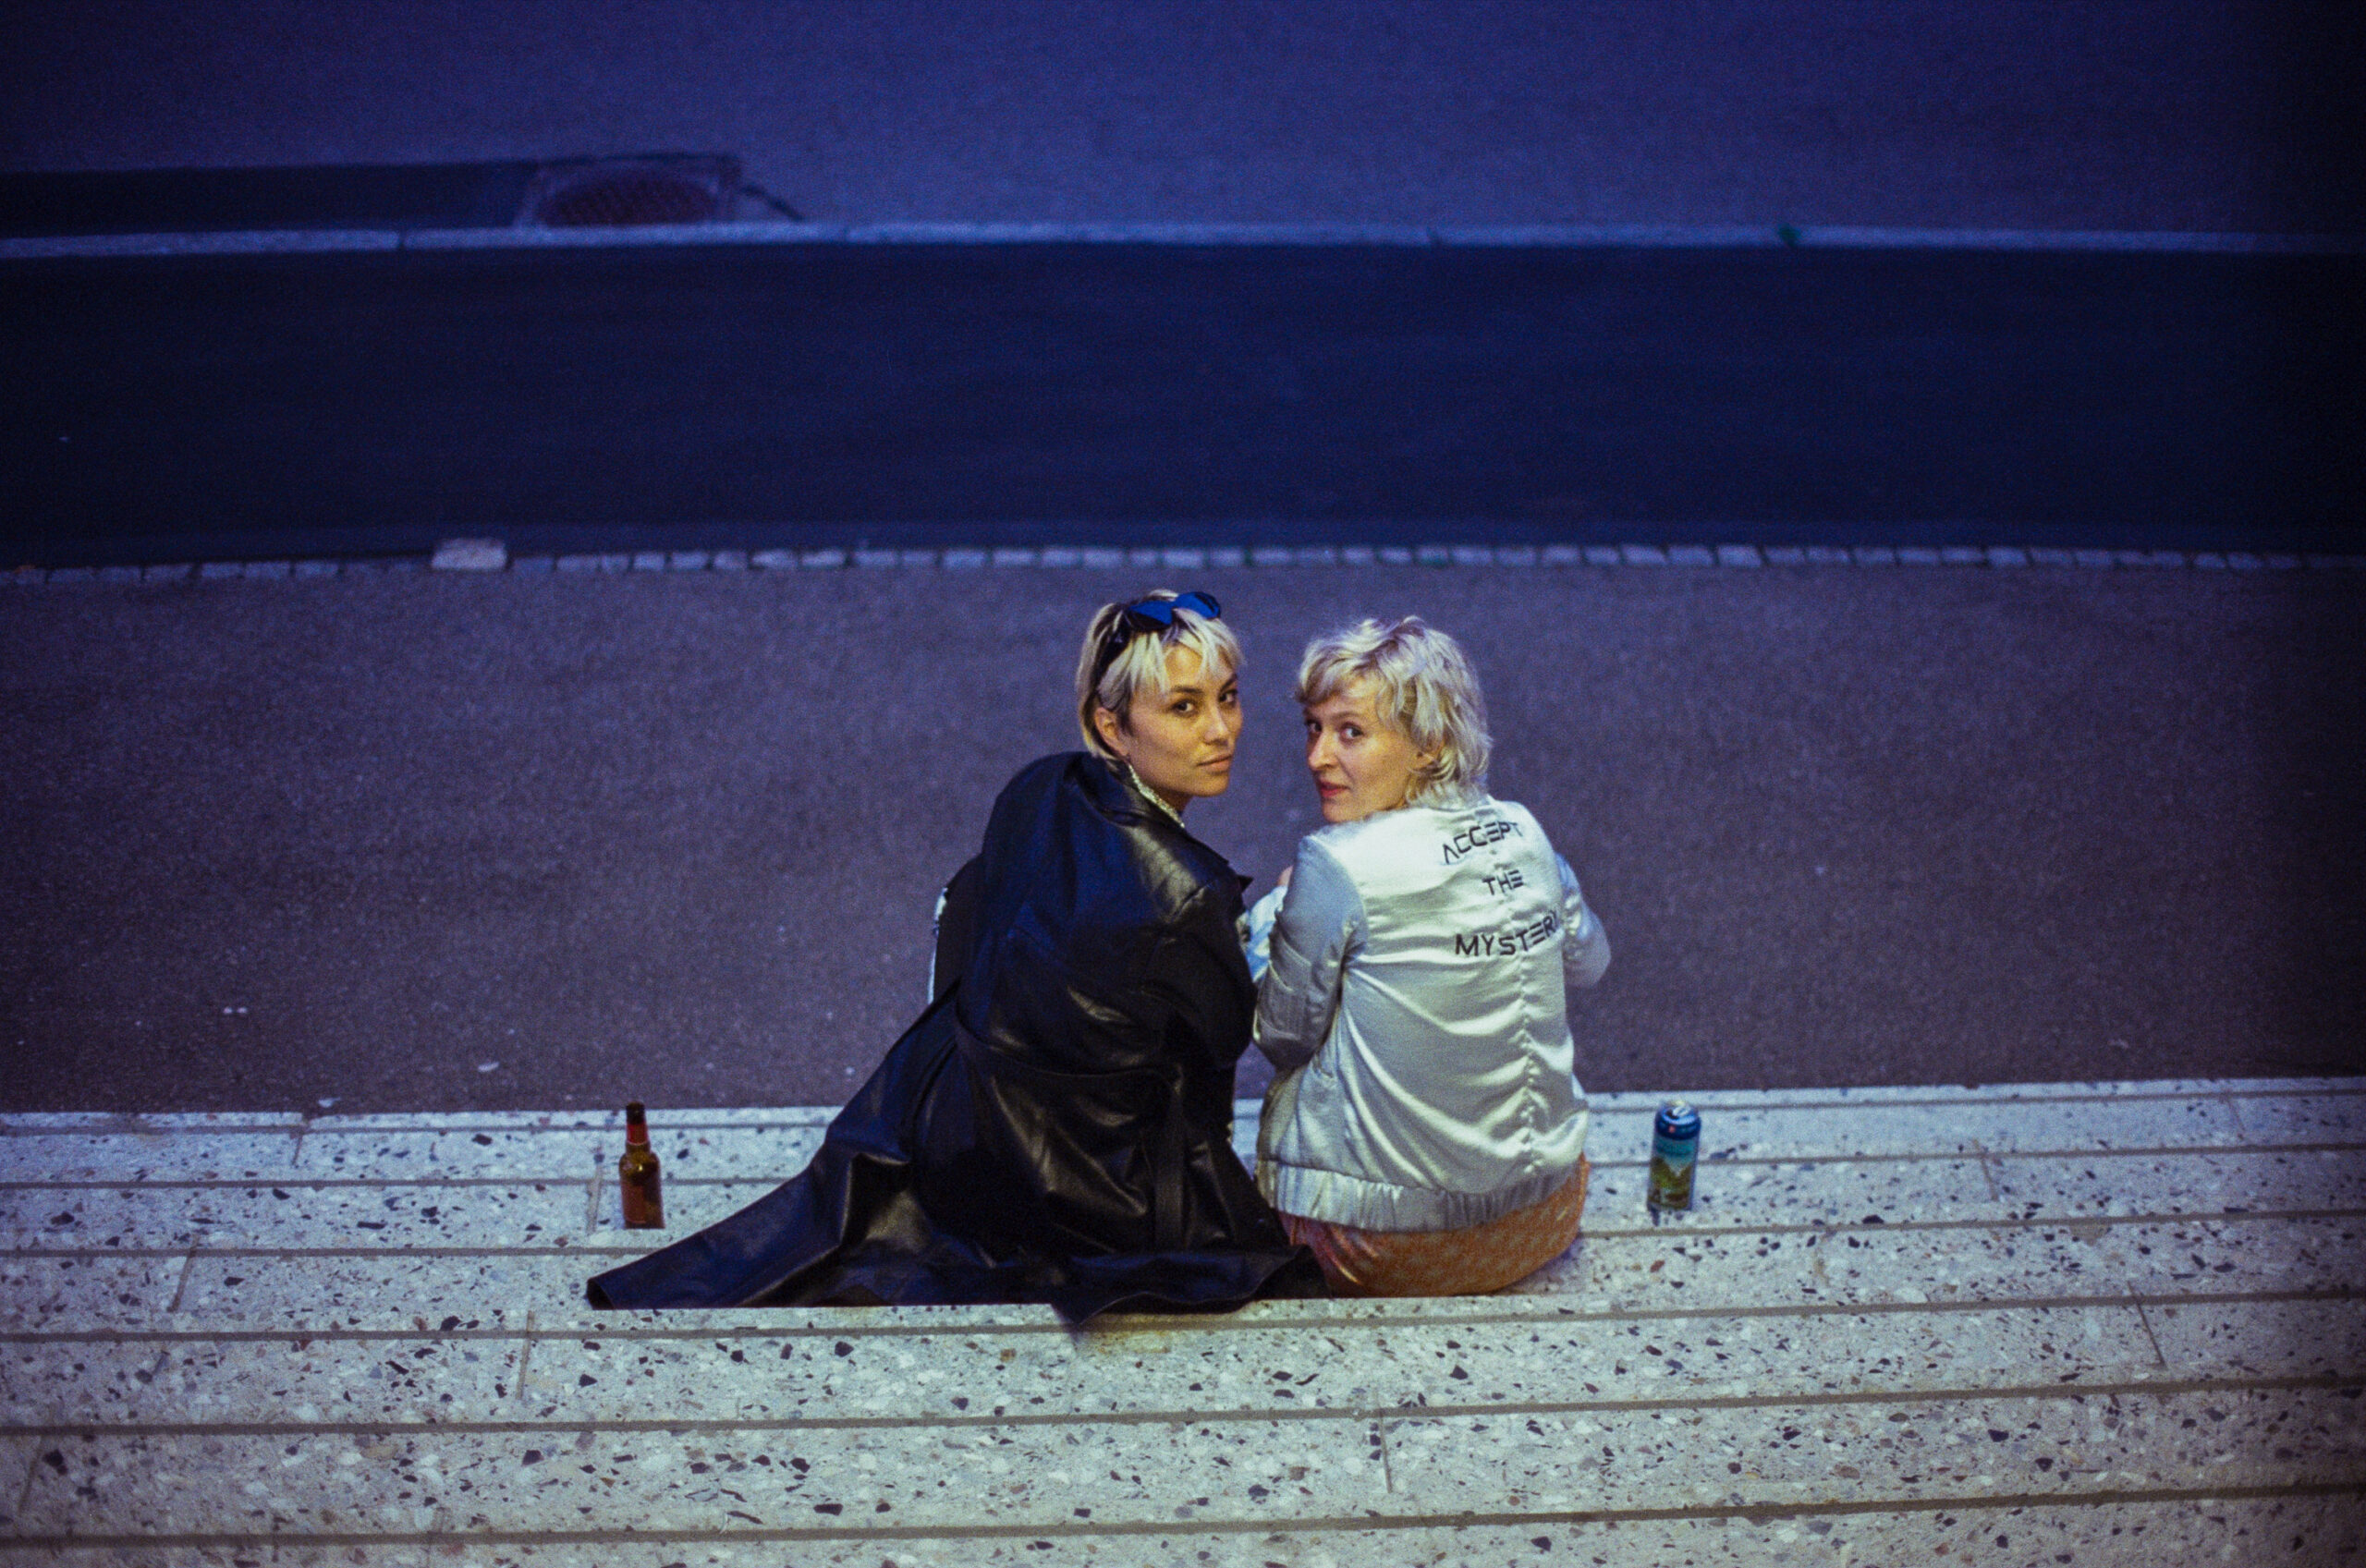 A street image with blue lighting featuring two women in the middle of the shot seating down at some stairs and looking up to the camera.